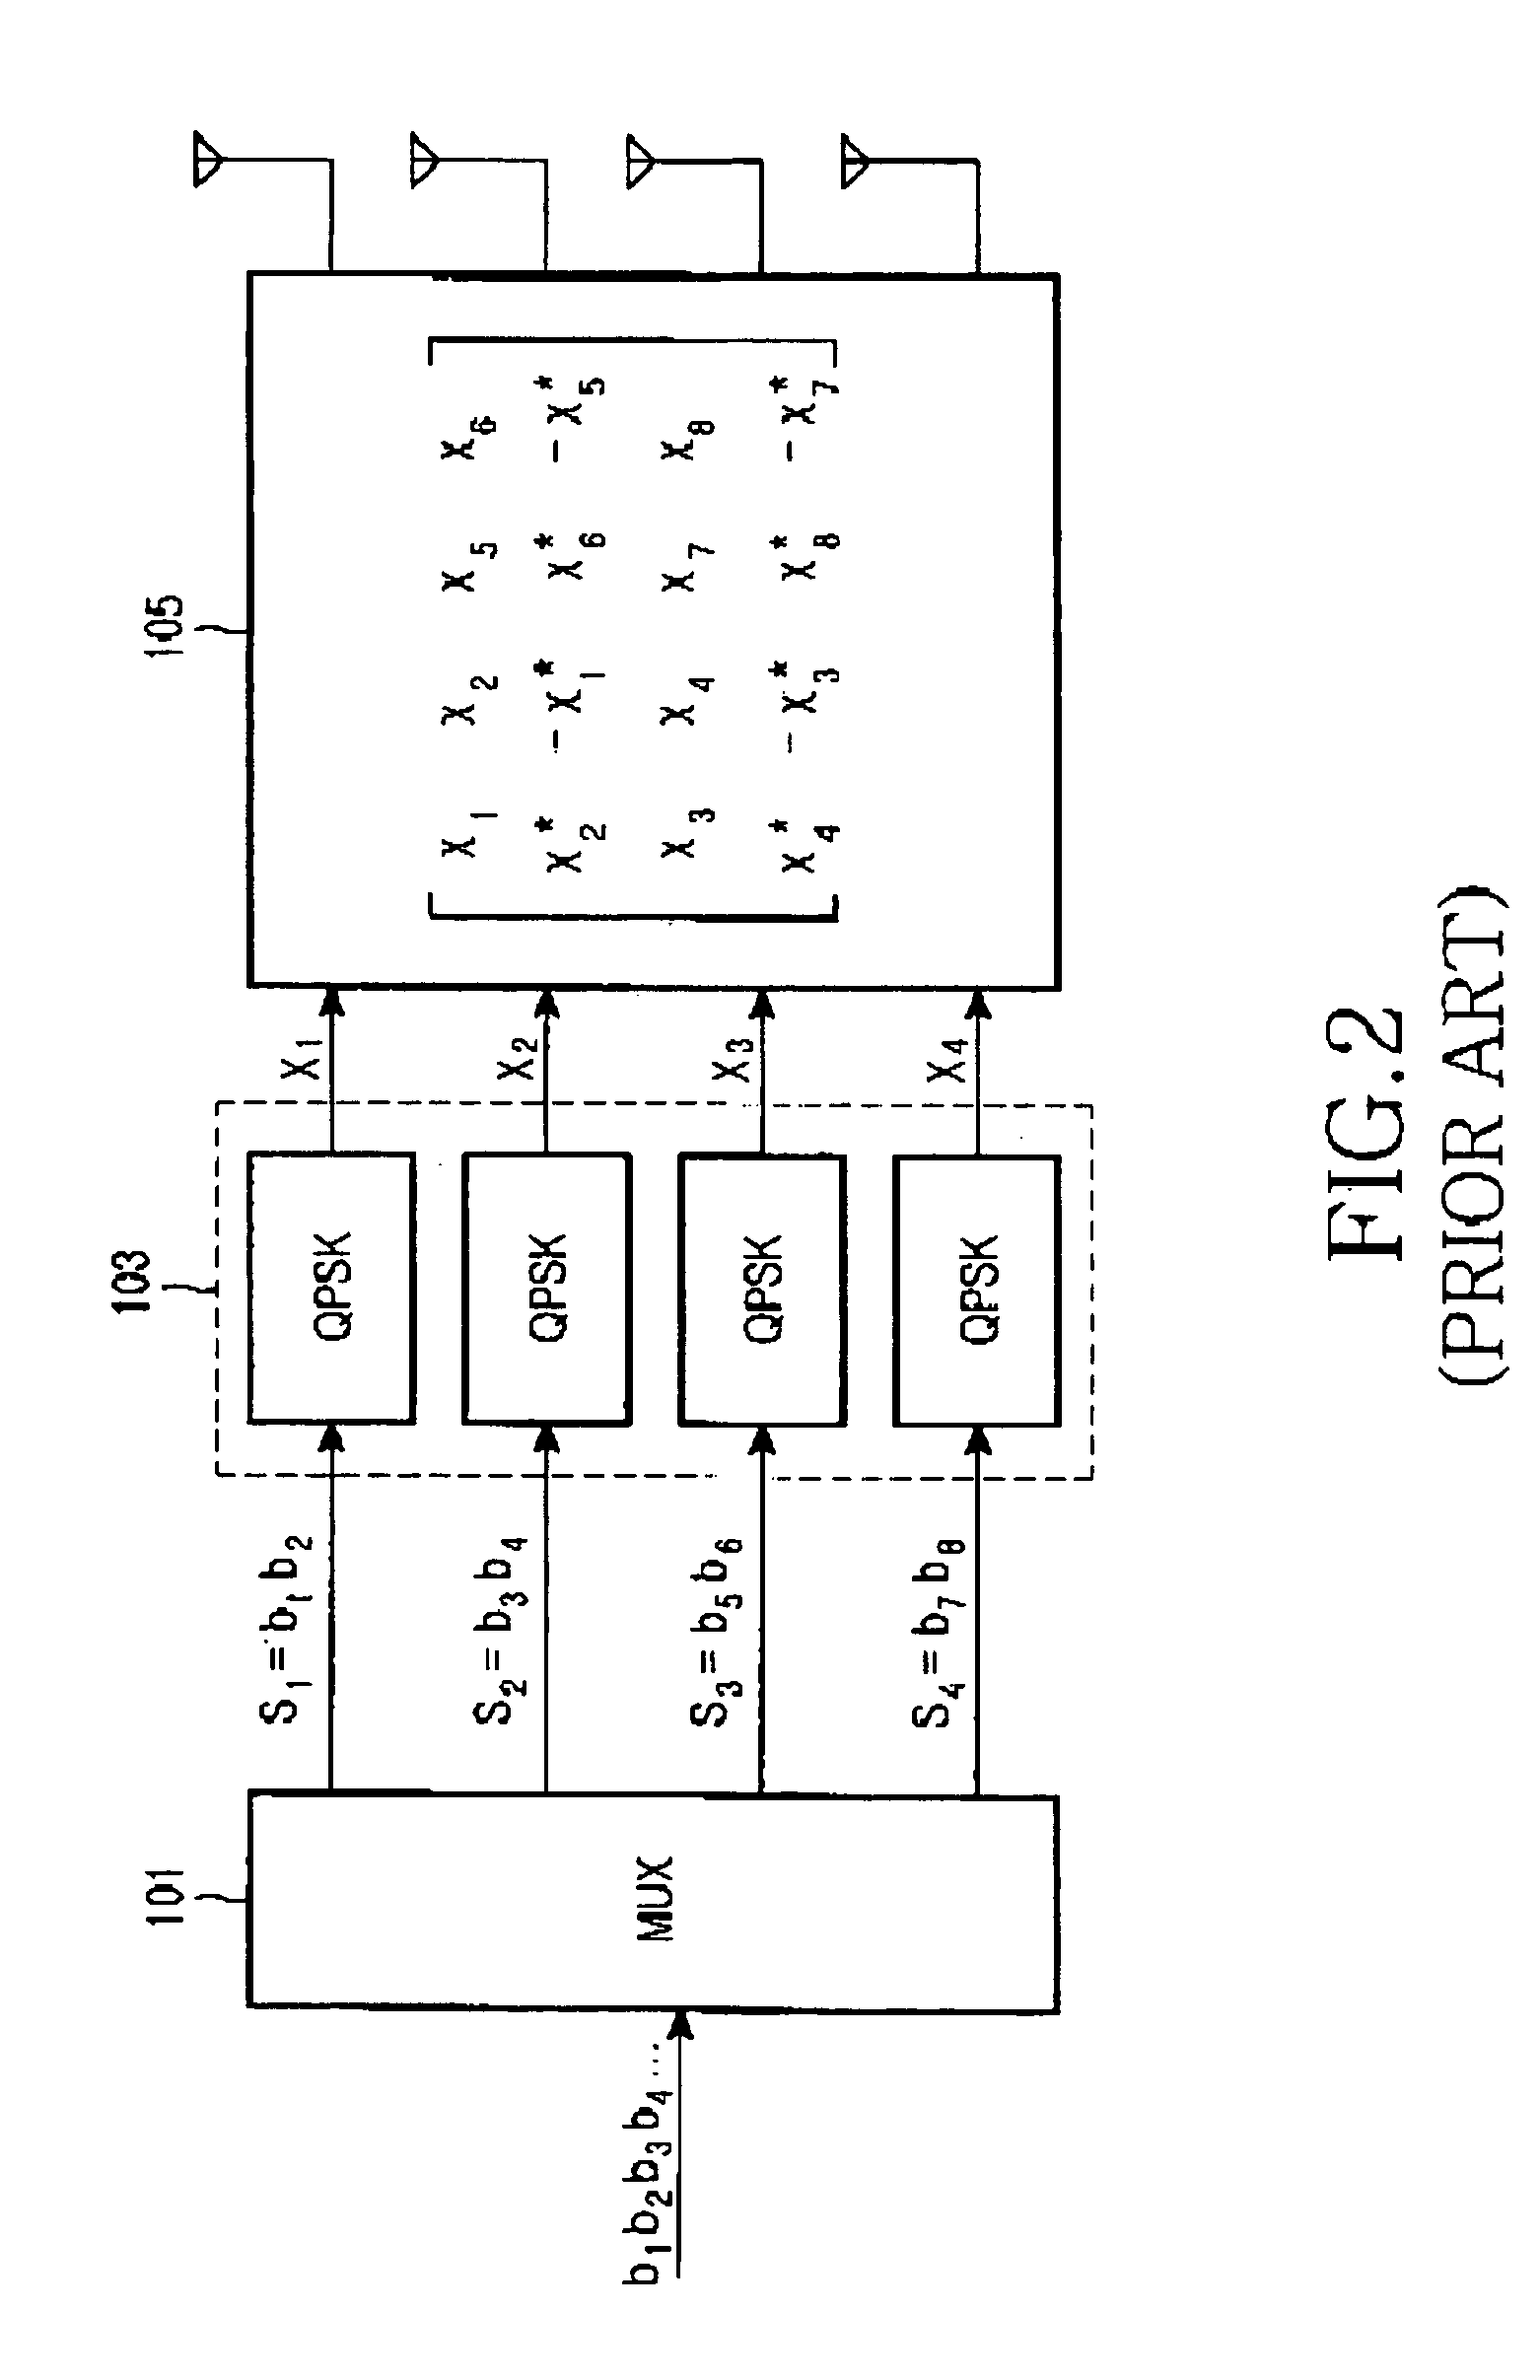 Transmission apparatus and method for MIMO system